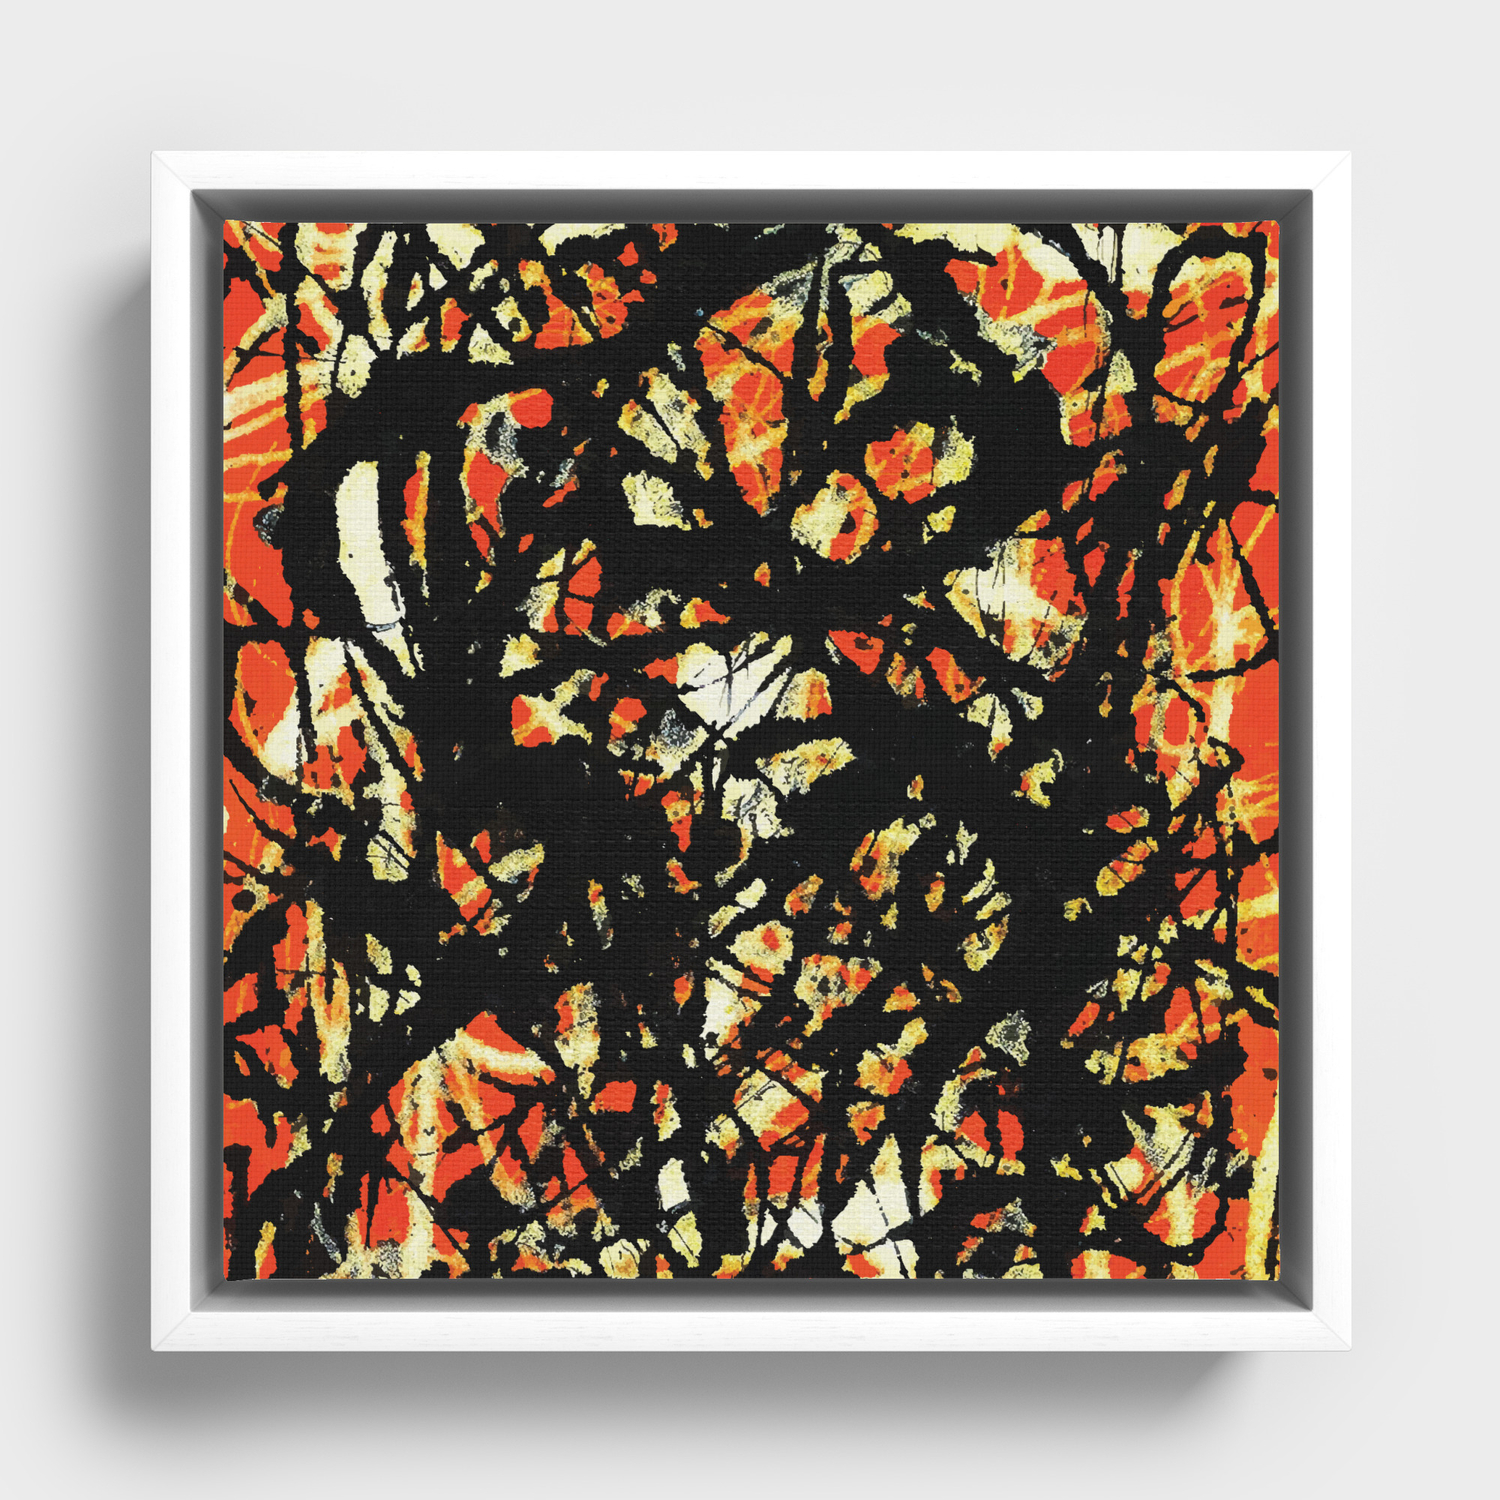 BLACK WHITE COLOURFUL FRAMED CANVAS WALL ART PICTURE PRINT JACKSON POLLOCK 7 